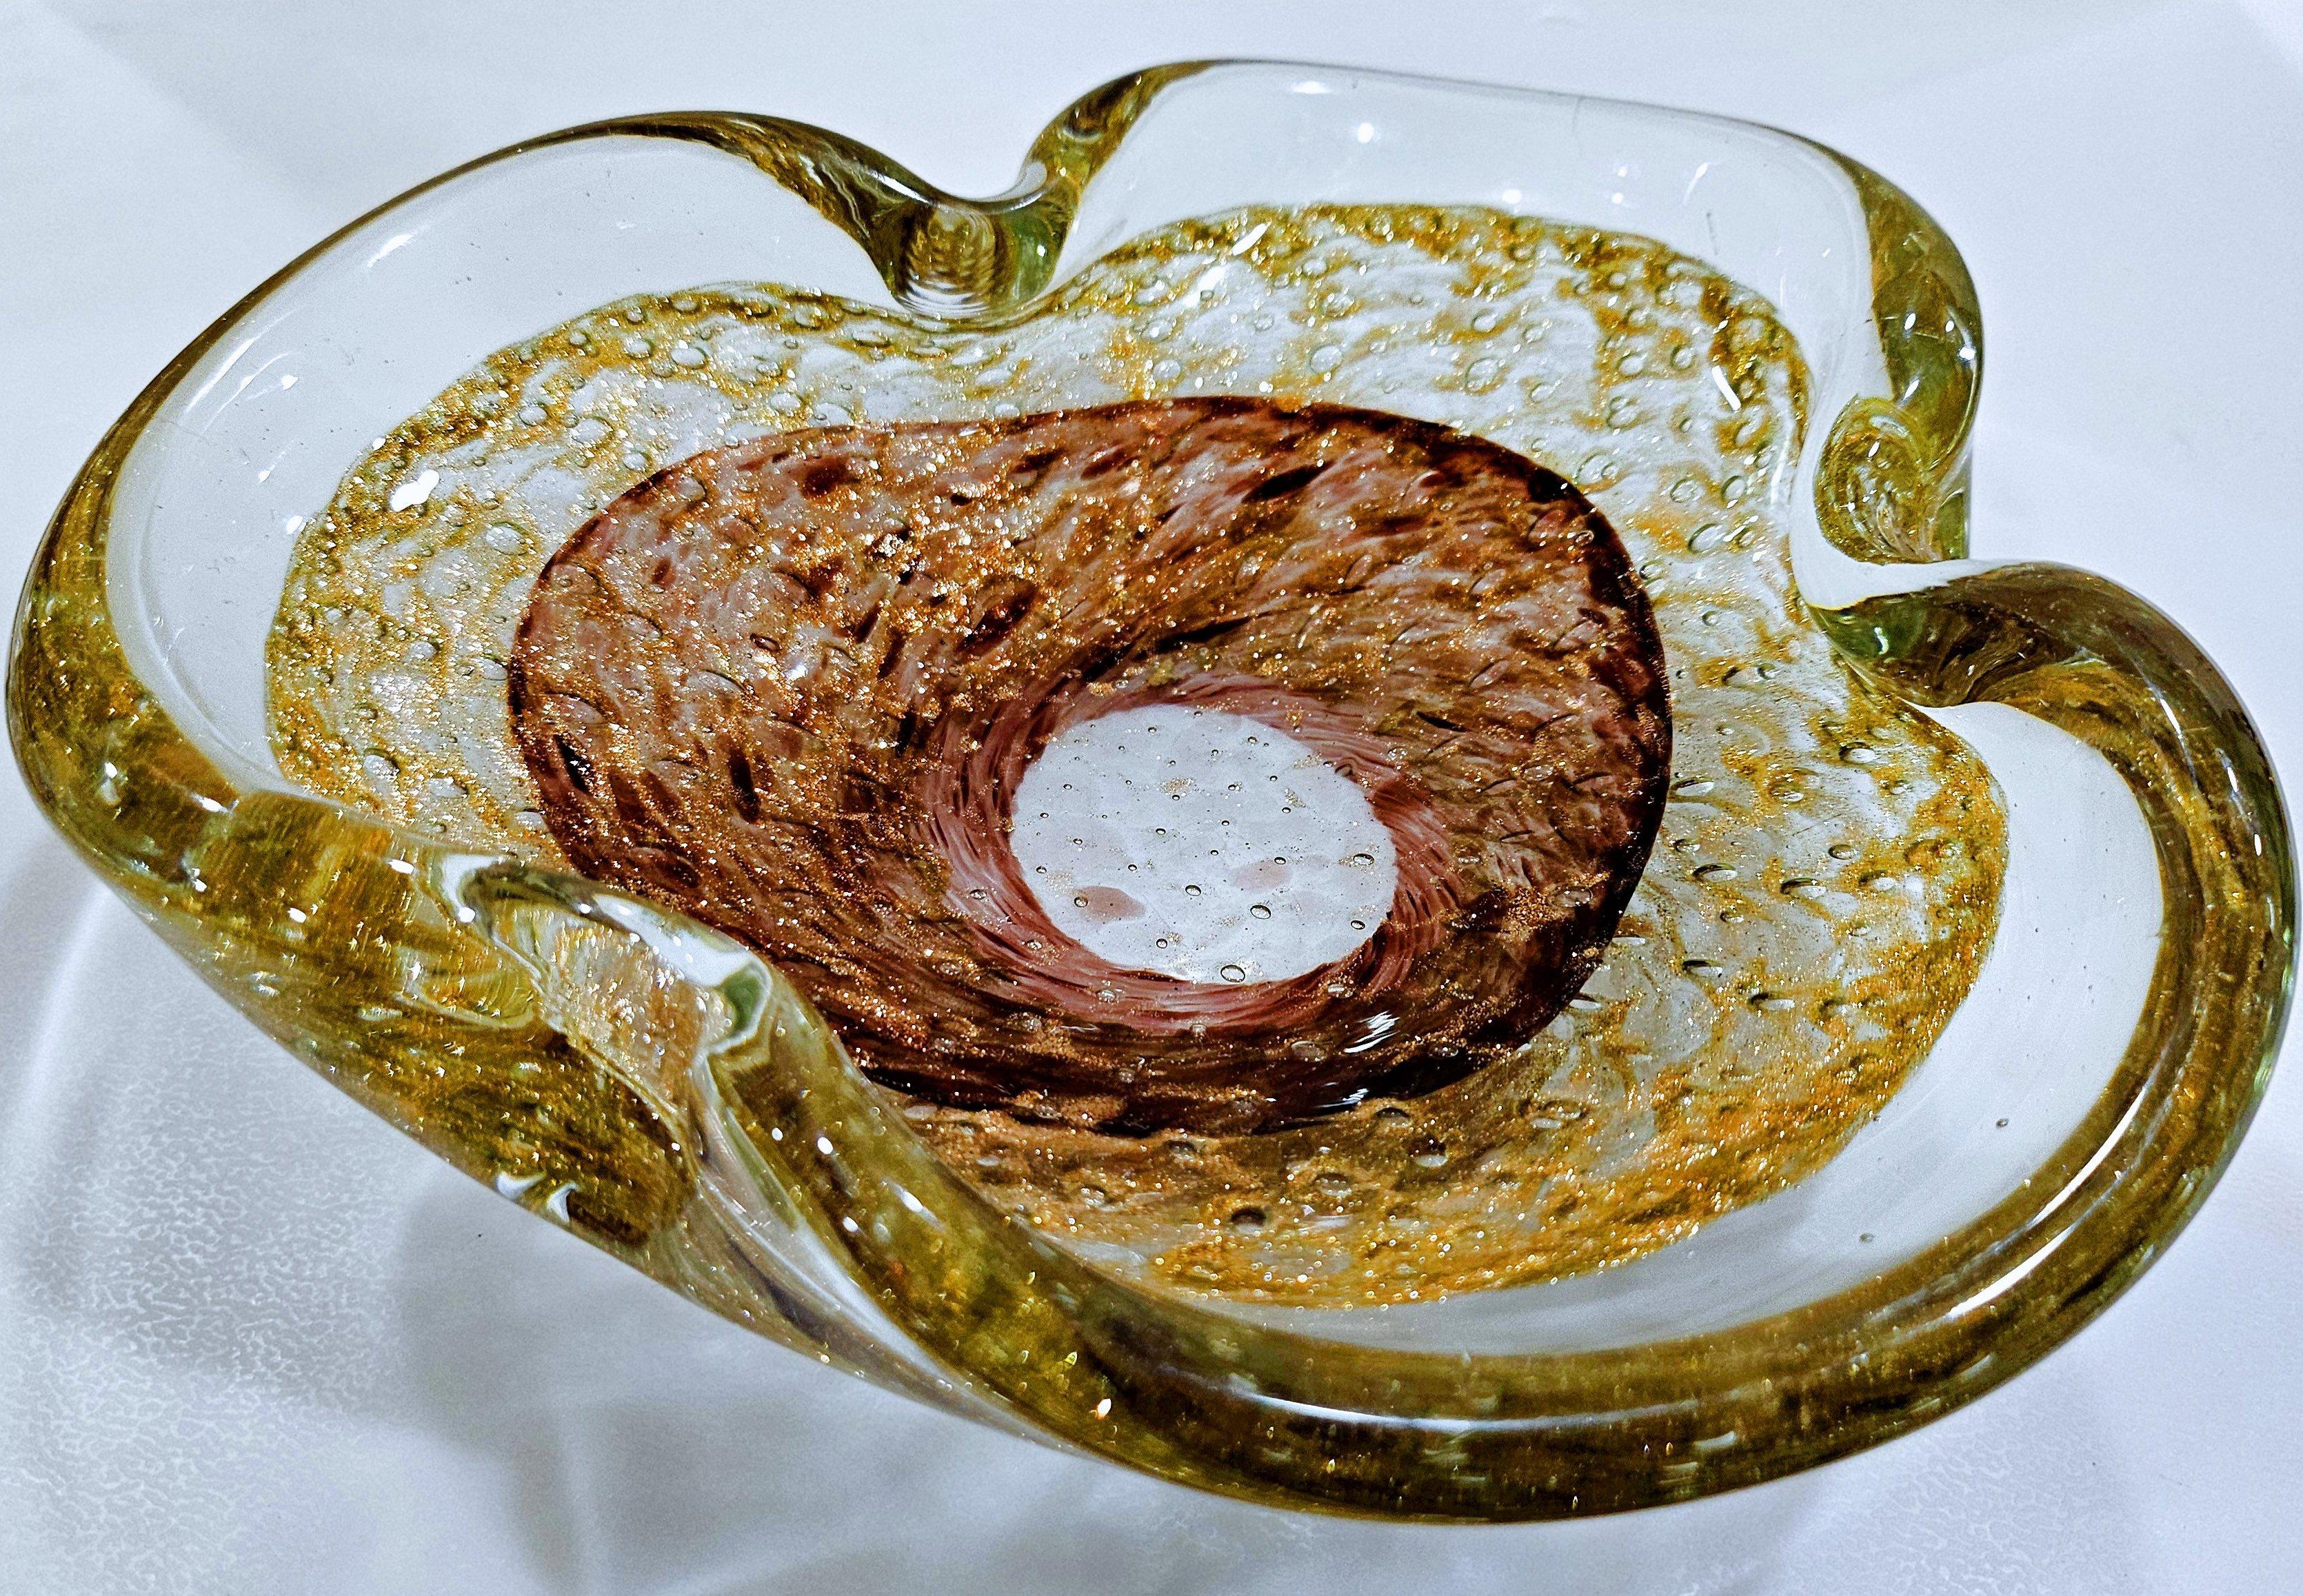 Vintage Murano Glass Ashtray/Dish, Bullicante (controlled bubbles) & Aventurine
If you like shimmer, you'll love this piece with its generous aventurine, inside which is a nice, subtle pattern of controlled bubbles.
Measures: approximately 7 x 2 